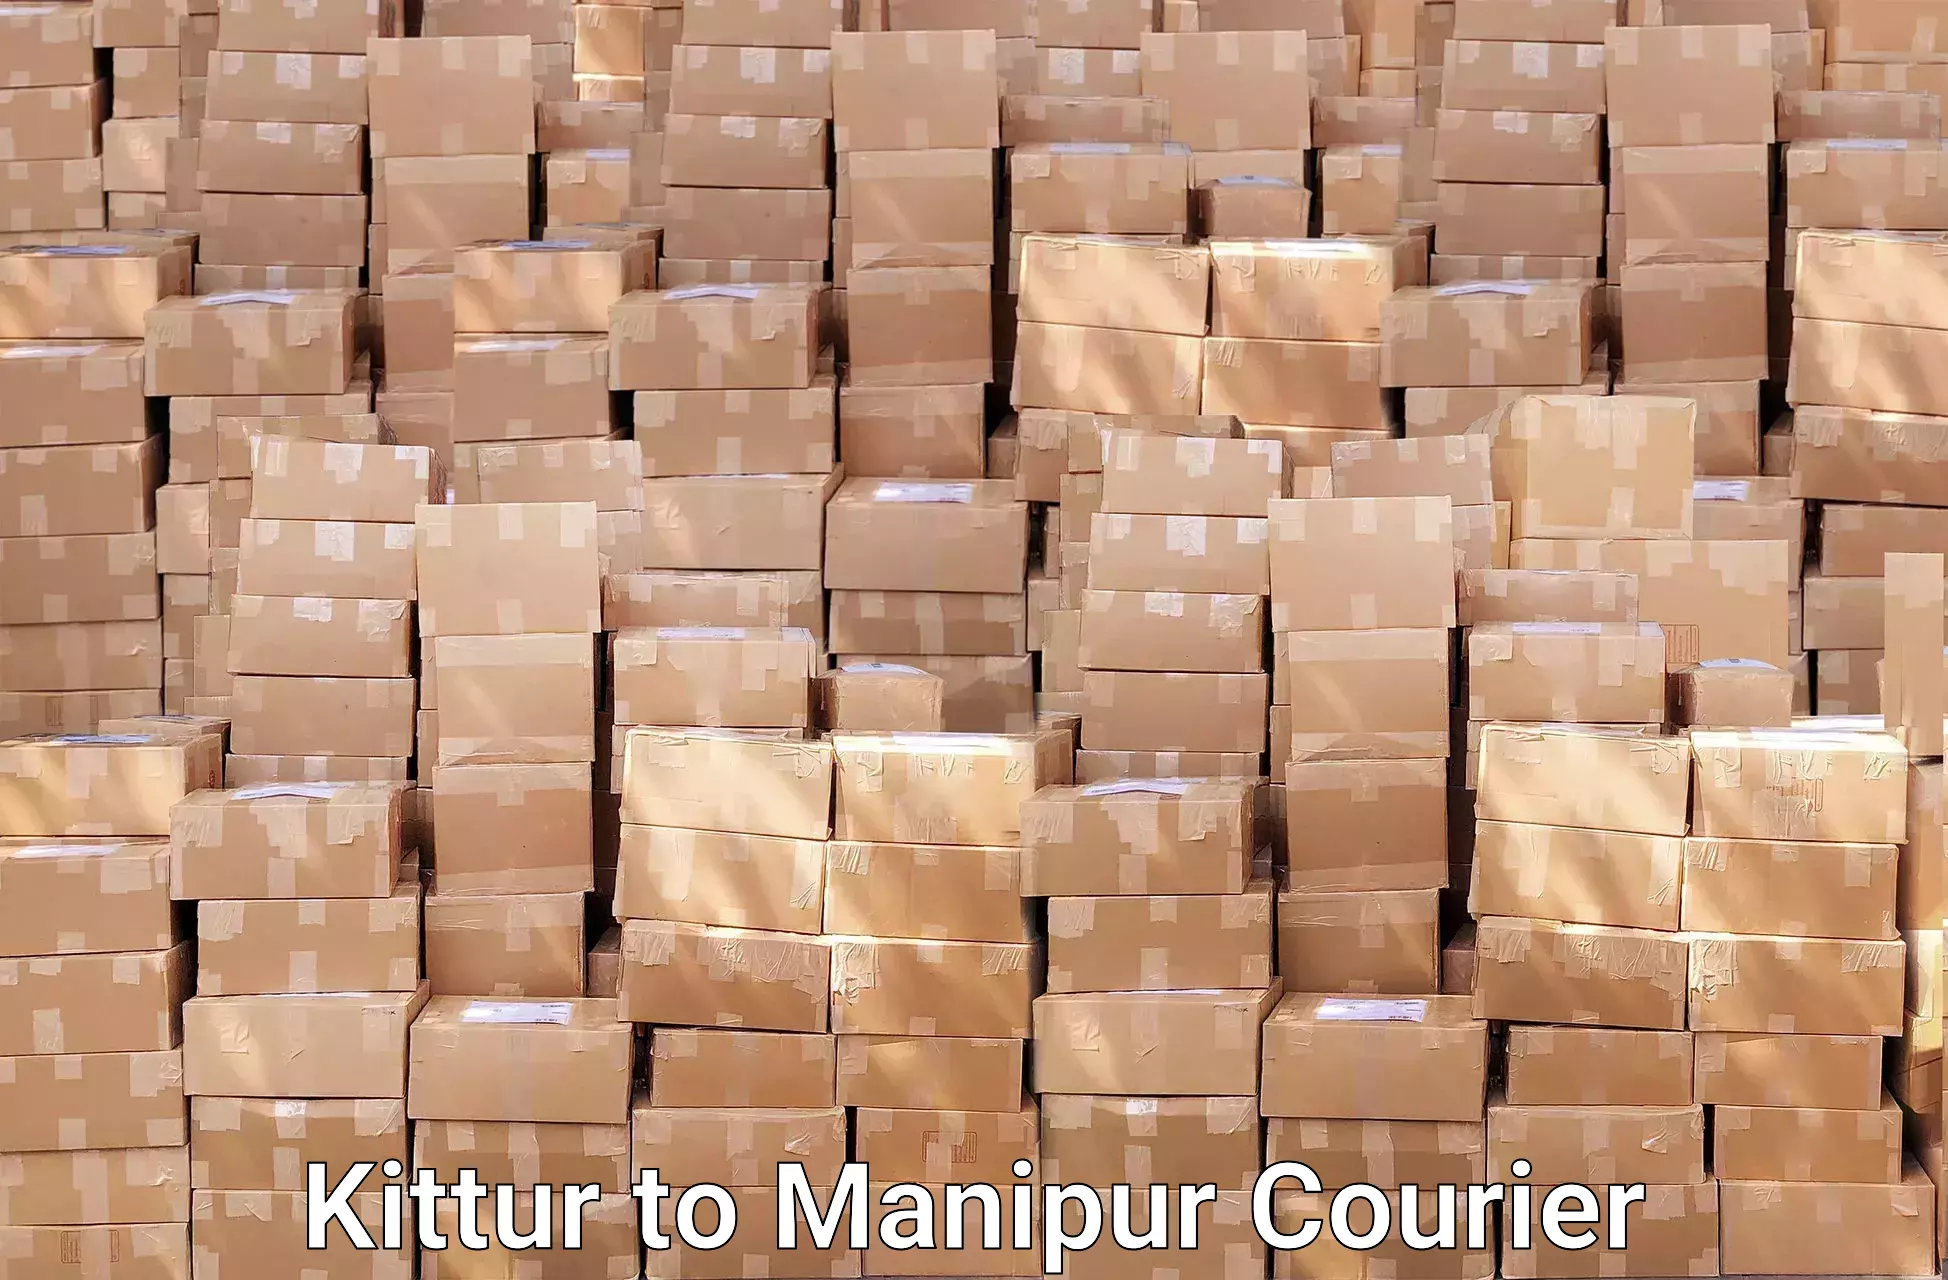 Quality relocation services Kittur to Manipur